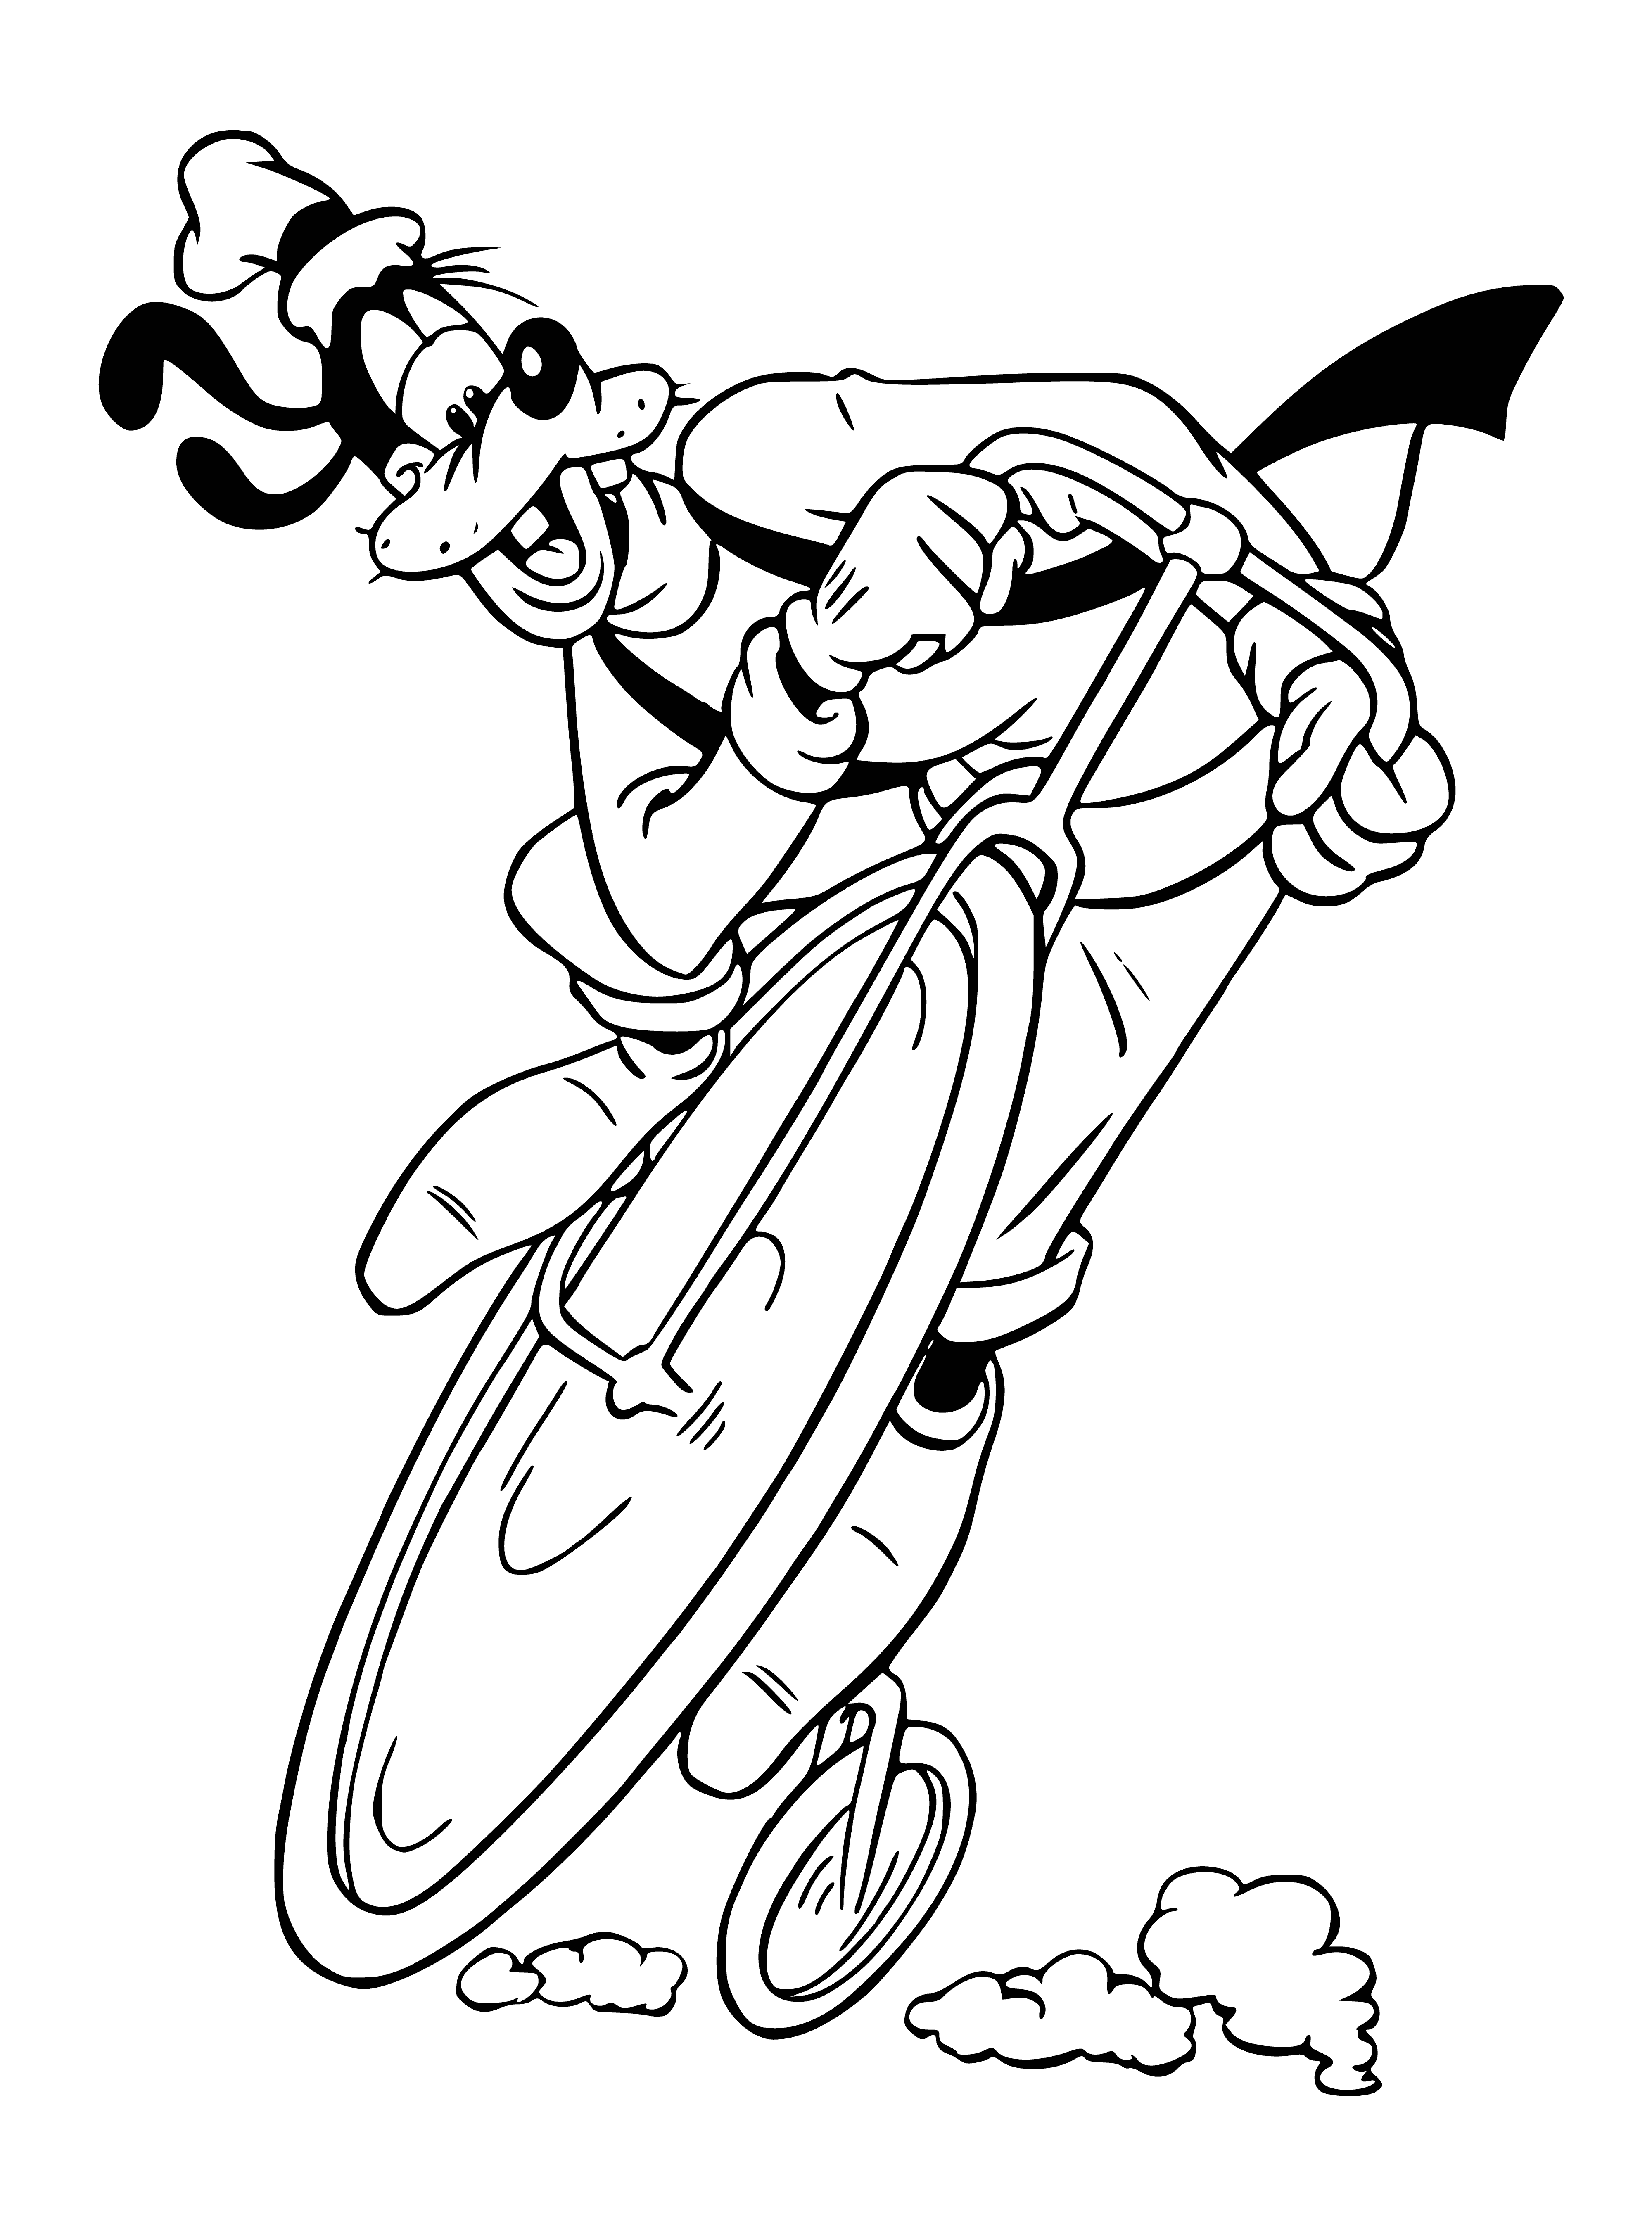 Bike coloring page